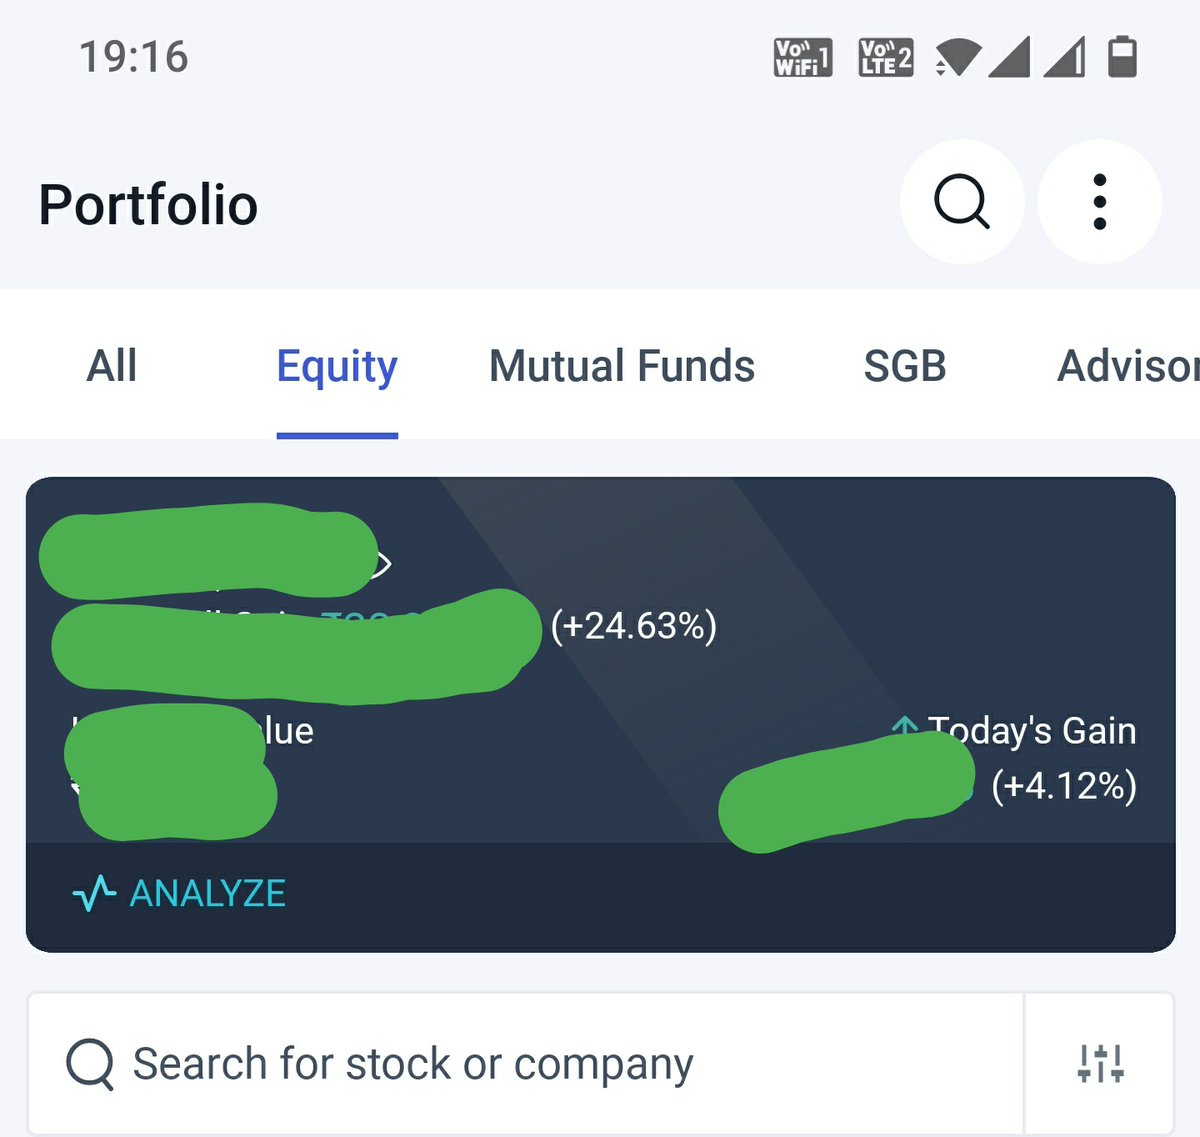 Today was a good day! Market was kind, PF up by 4%🚀📈
#StockMarket #investment #trading #MarketTrends #stocks